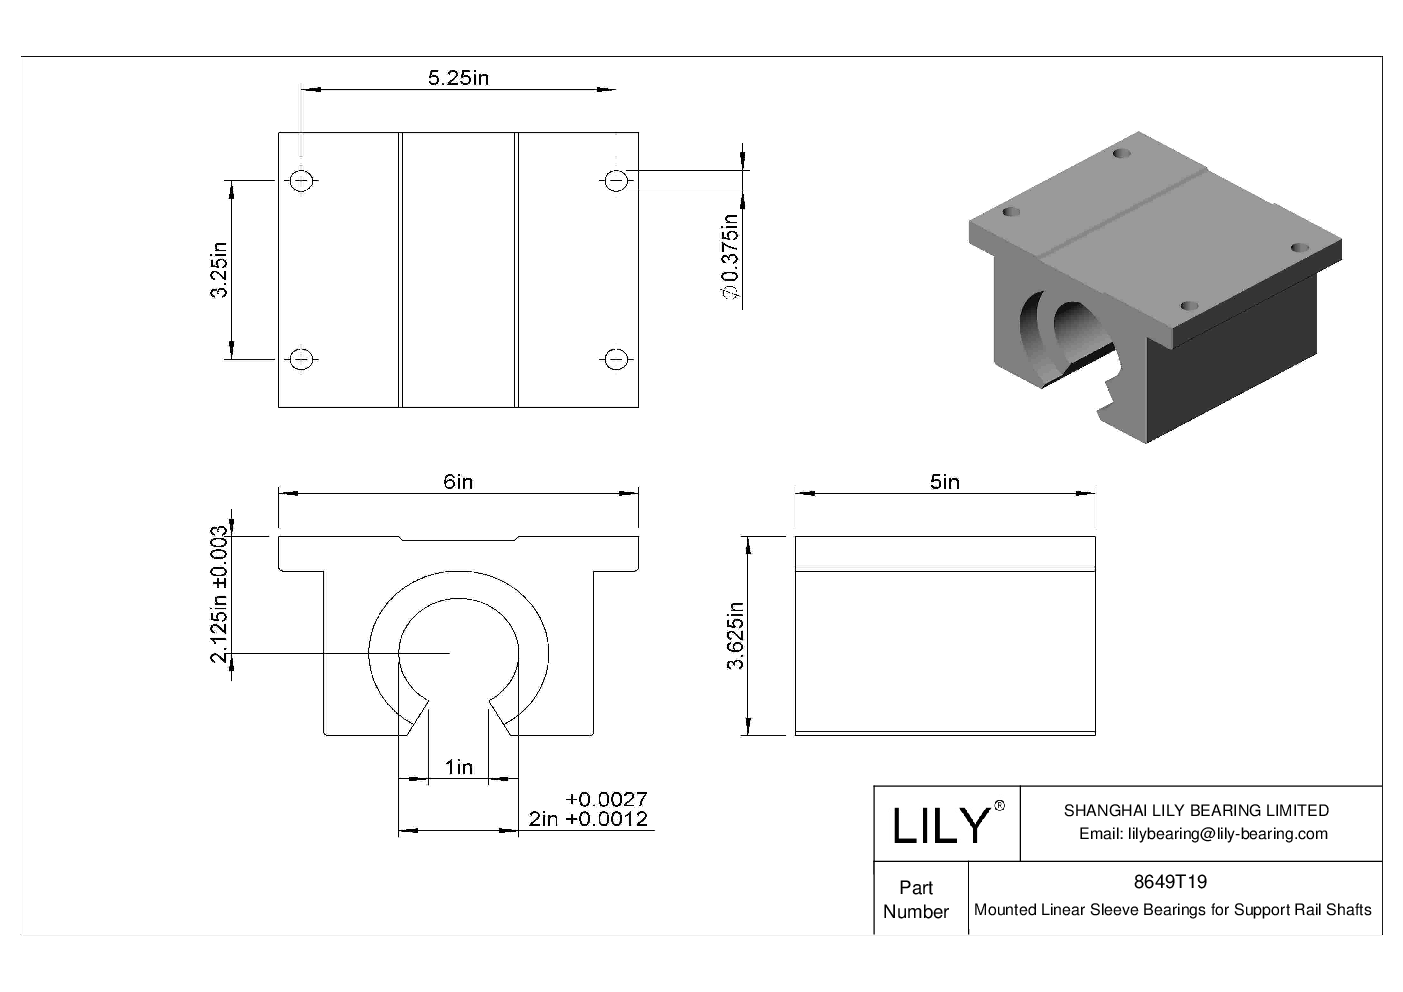 IGEJTBJ Common Mounted Linear Sleeve Bearings for Support Rail Shafts cad drawing